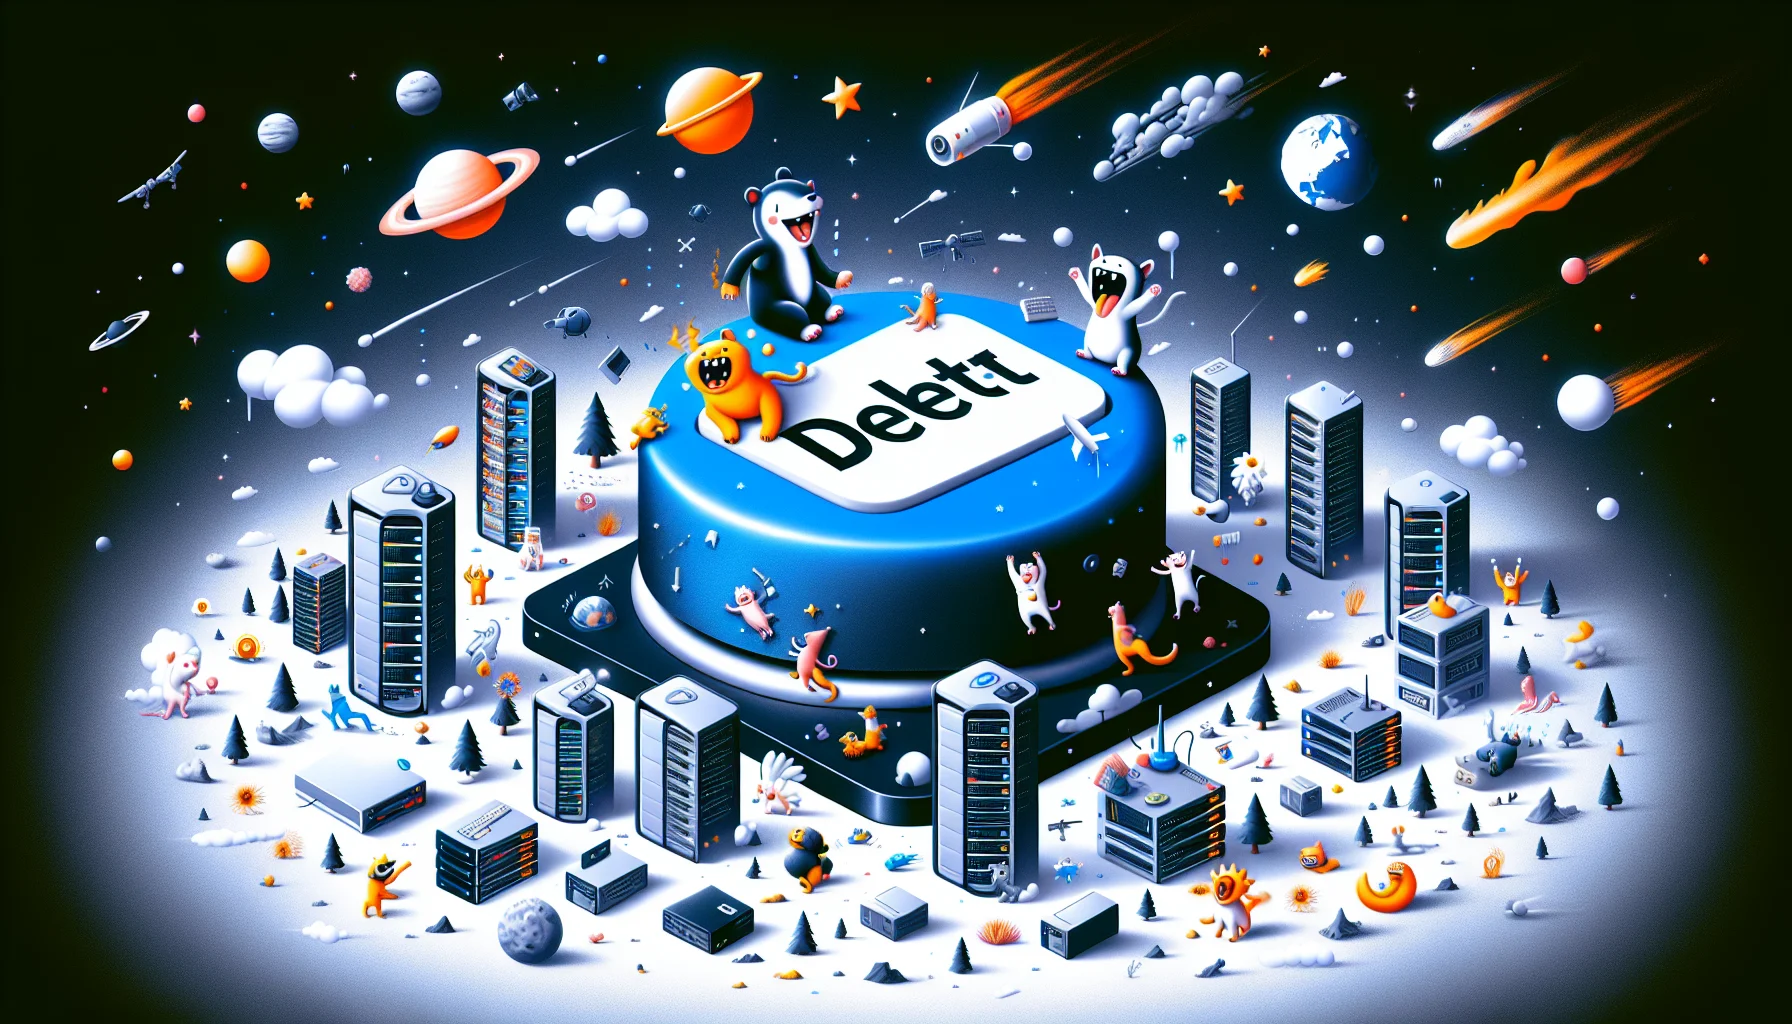 Create a humorous yet alluring image, emphasizing a fanciful perspective of the universe of web hosting. It captures the concept of a 'domain deletion', but not related to any particular brand or company. In the center is an oversized, cartoonish 'delete' button. Tech-savvy anthropomorphized animals are laughing and cavorting around it, clearly expressing the light-hearted atmosphere. Various mini buildings representing server racks and computers spread around, symbolizing the web hosting domain. Planets, stars, and comets revolve around this scene, hinting at the 'universal' coverage of web hosting.